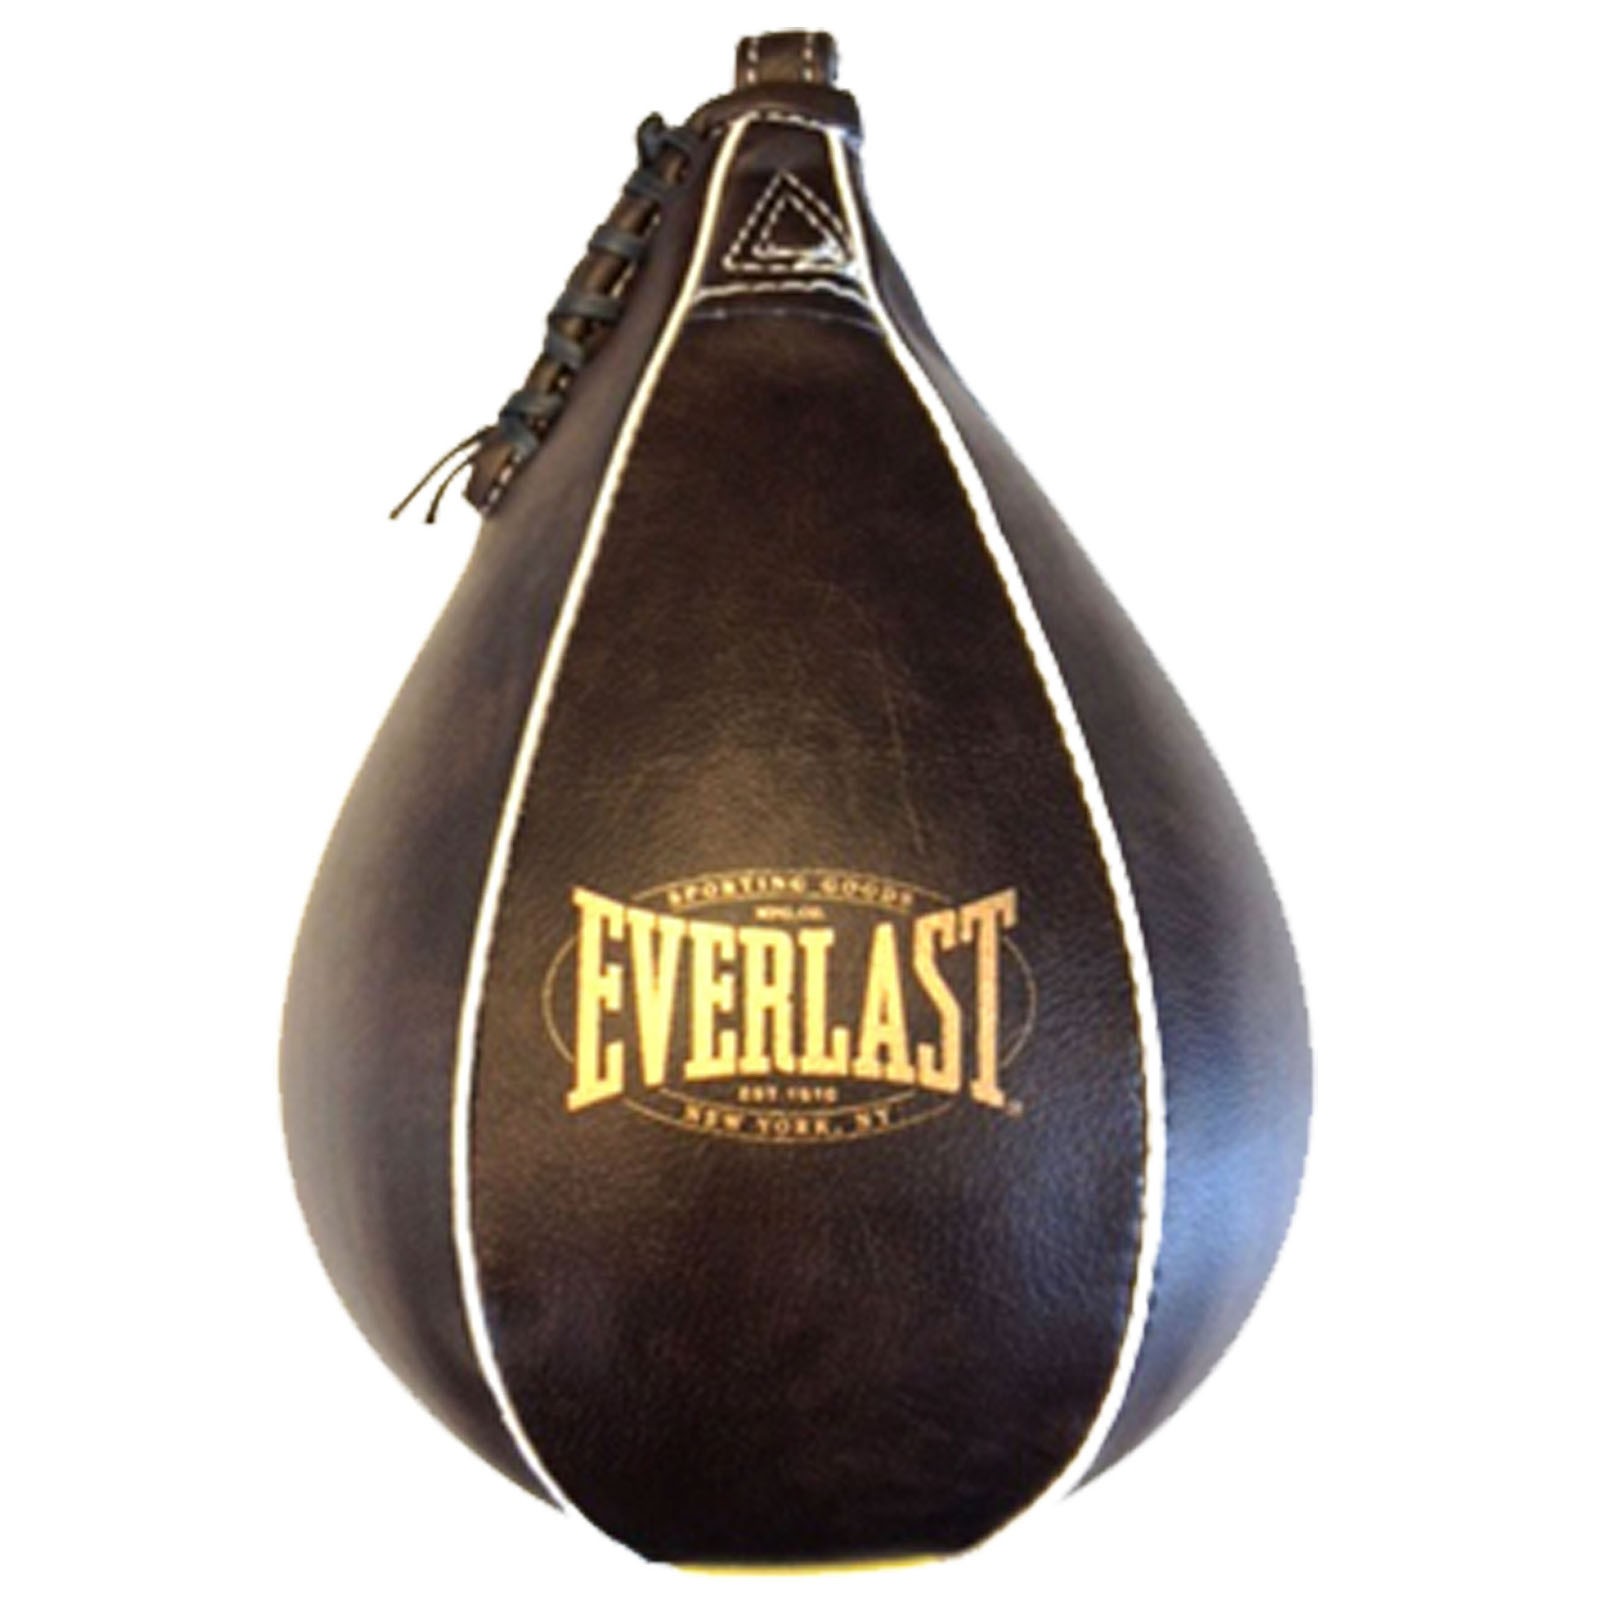 Everlast 1910 Collection - Speed Bag Buy & test - T-Fitness